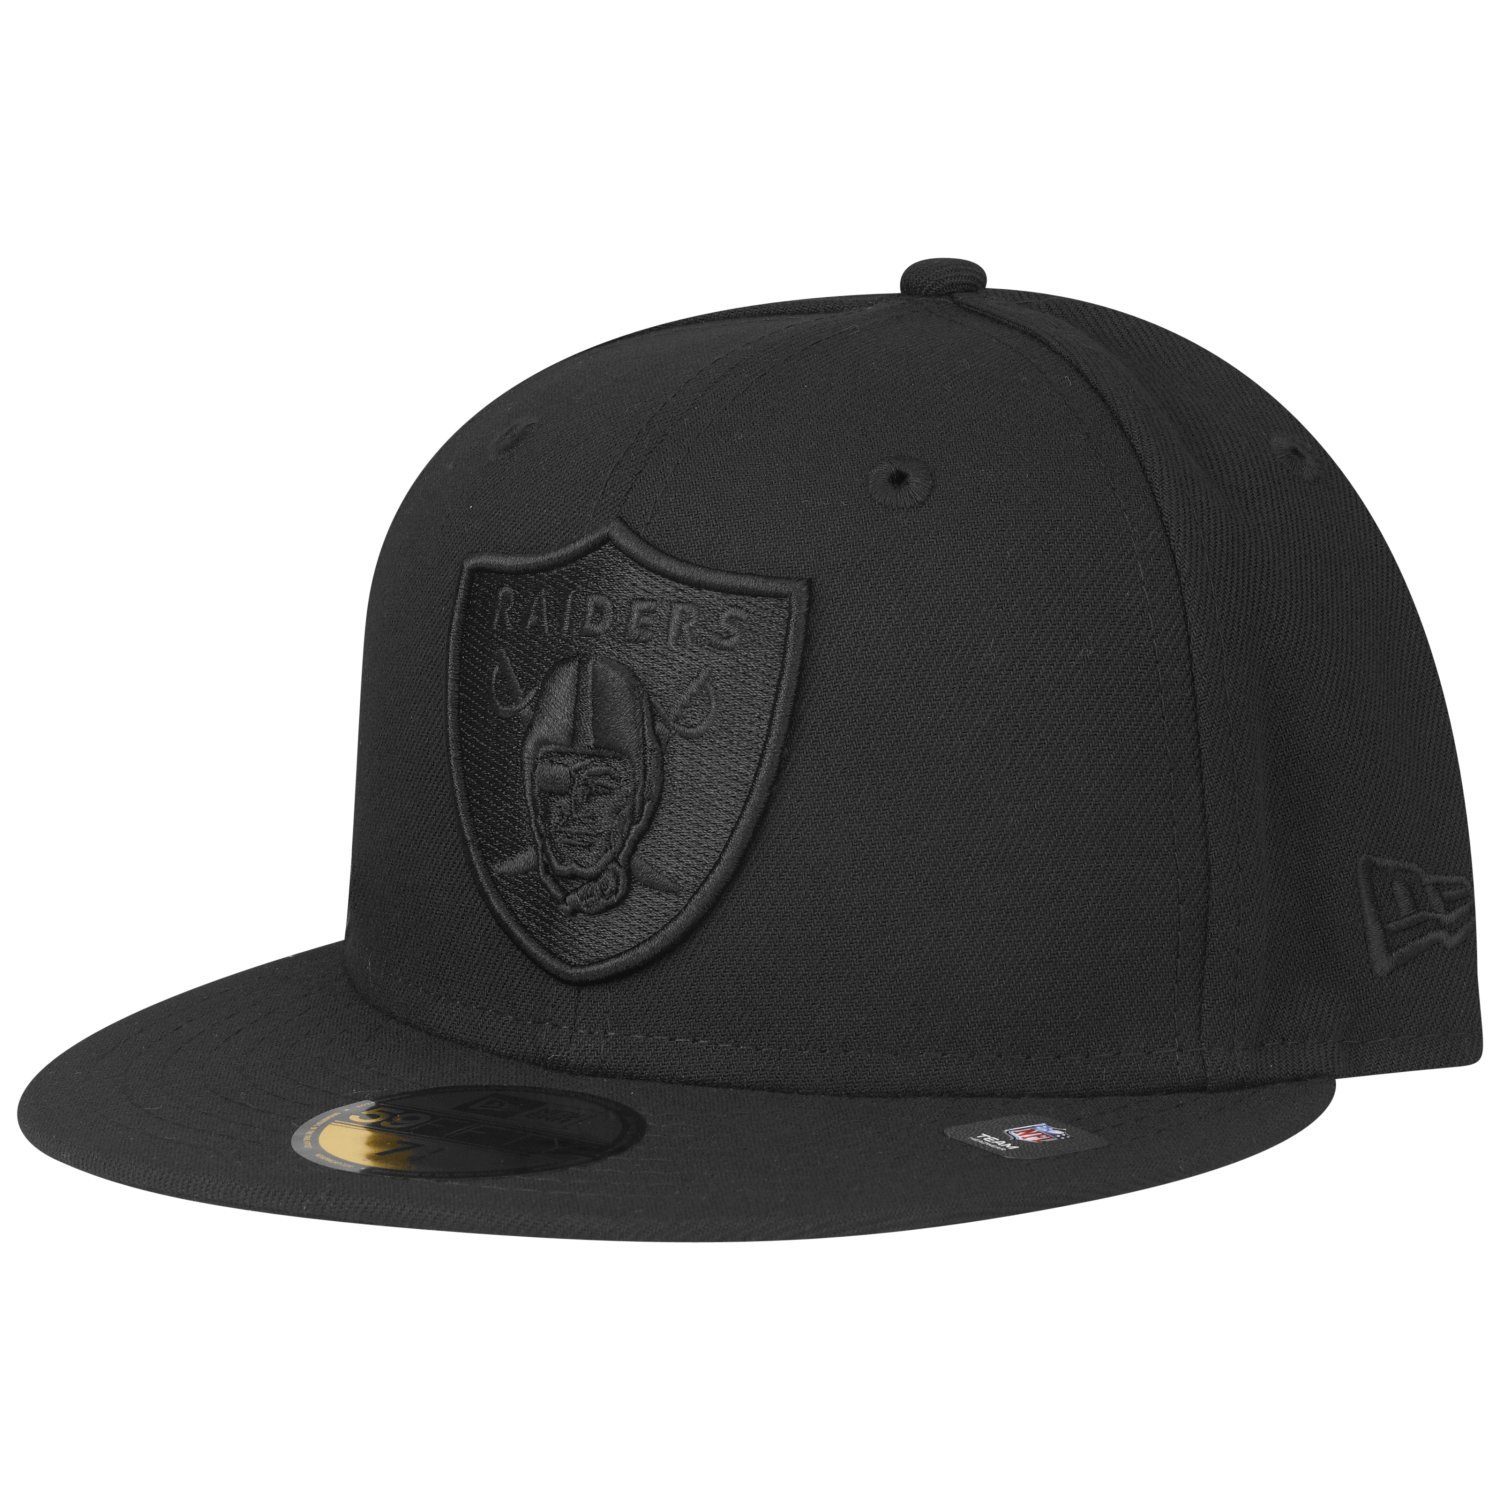 New Era Fitted Cap 59Fifty BLACKED Las Vegas Raiders